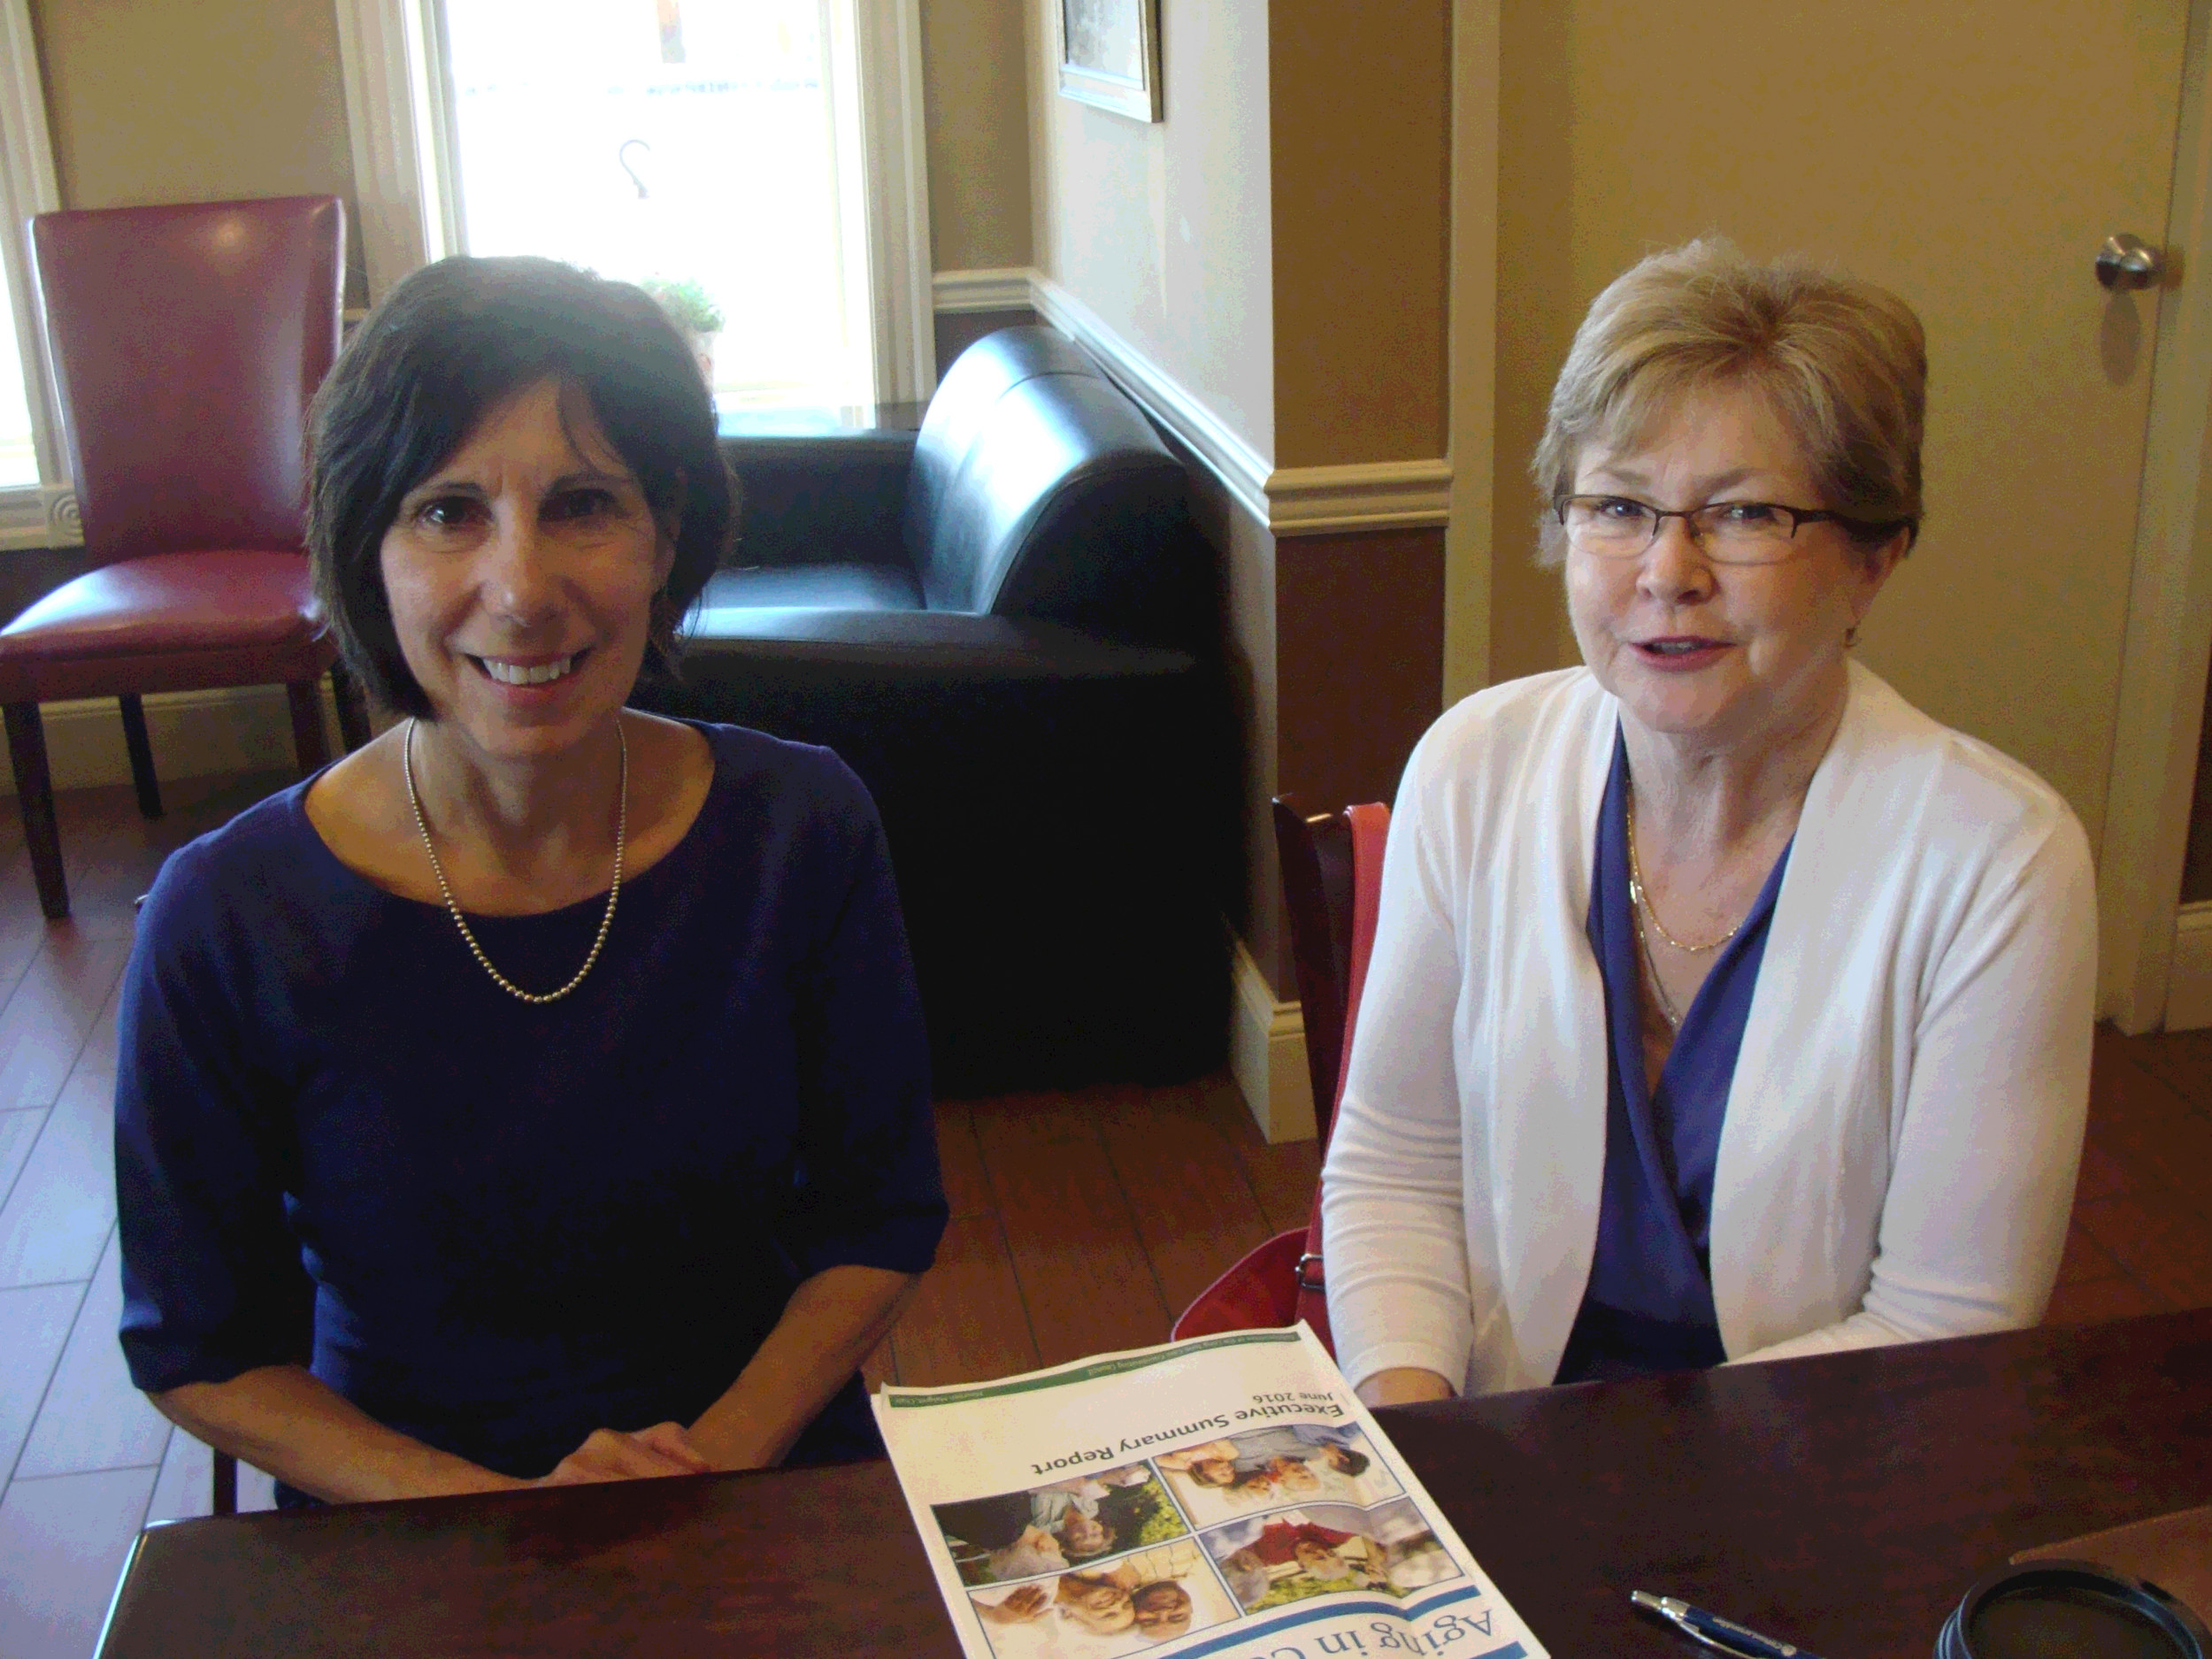 ELDER ABUSE AWARENESS: Roberta Merkle (left) and Jeanne Gattegno, right, both from St. Elizabeth Community, are working with the Division of Elderly Affairs to decrease elder abuse and raise awareness.